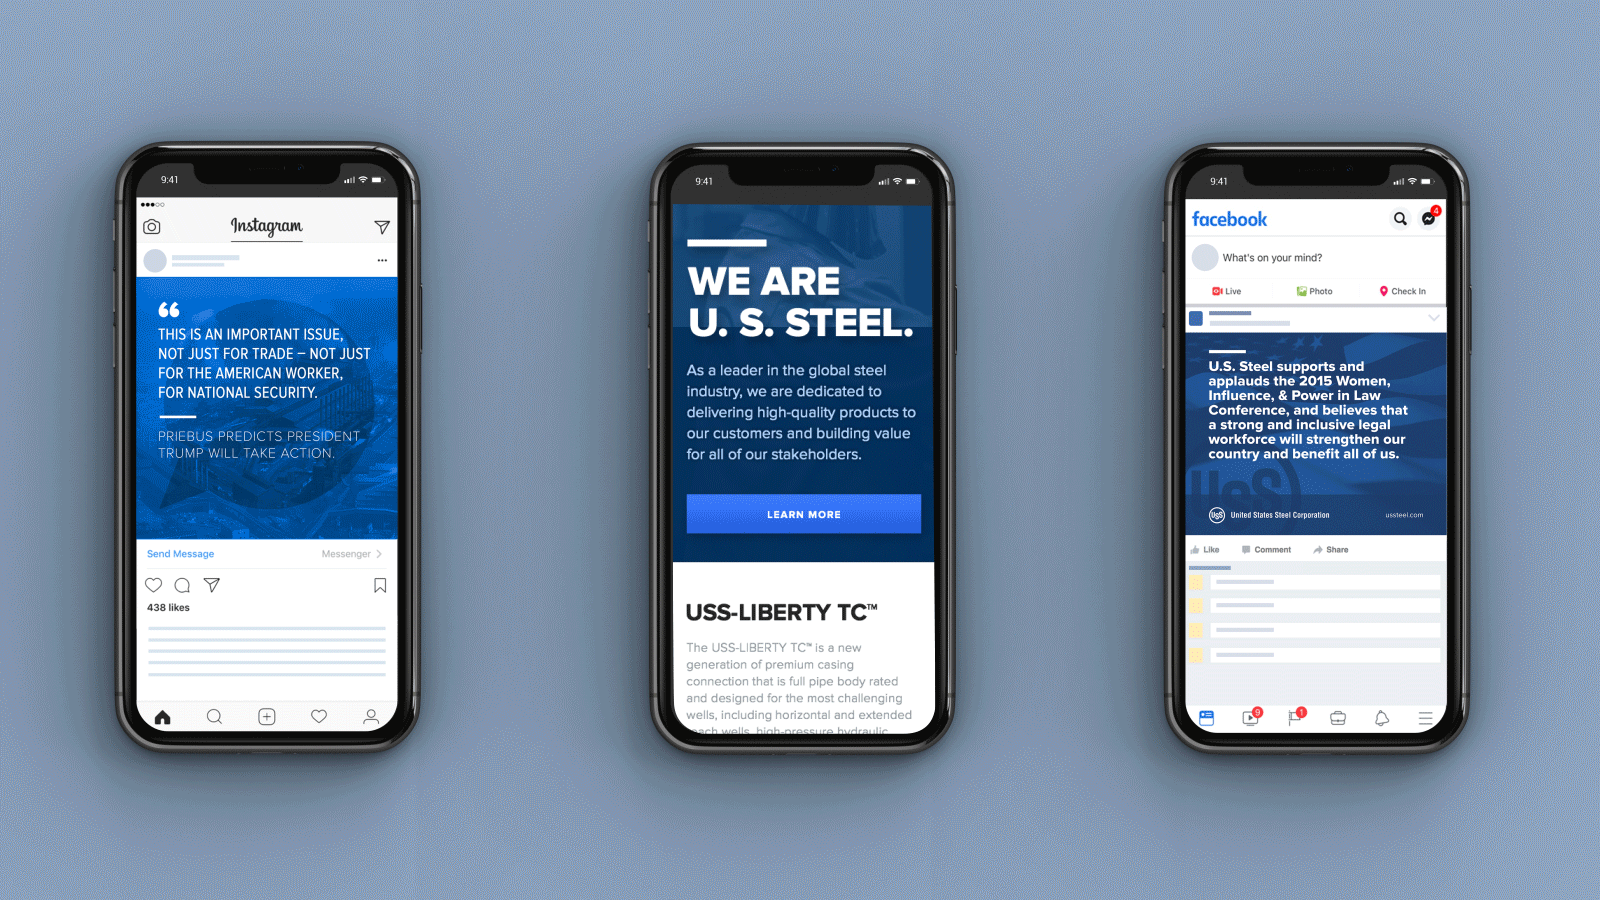 Three iPhones displaying the Instagram page, Facebook page, and website for U.S. Steel